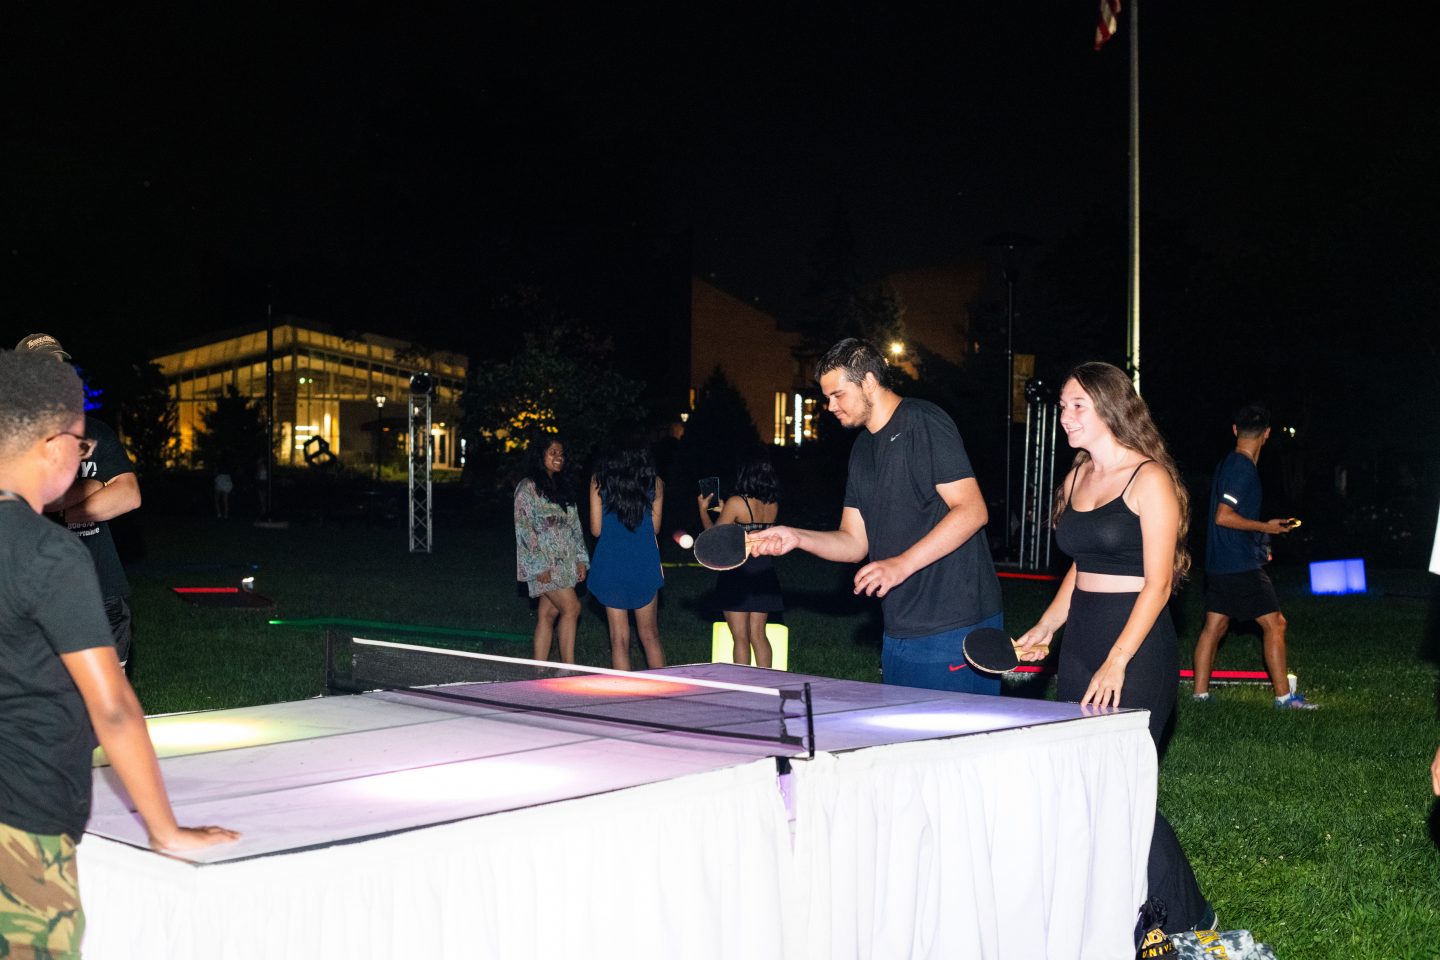 A night-time outdoor table tennis game in progress, with two players at a lit-up table and others socializing in the background near an illuminated building.